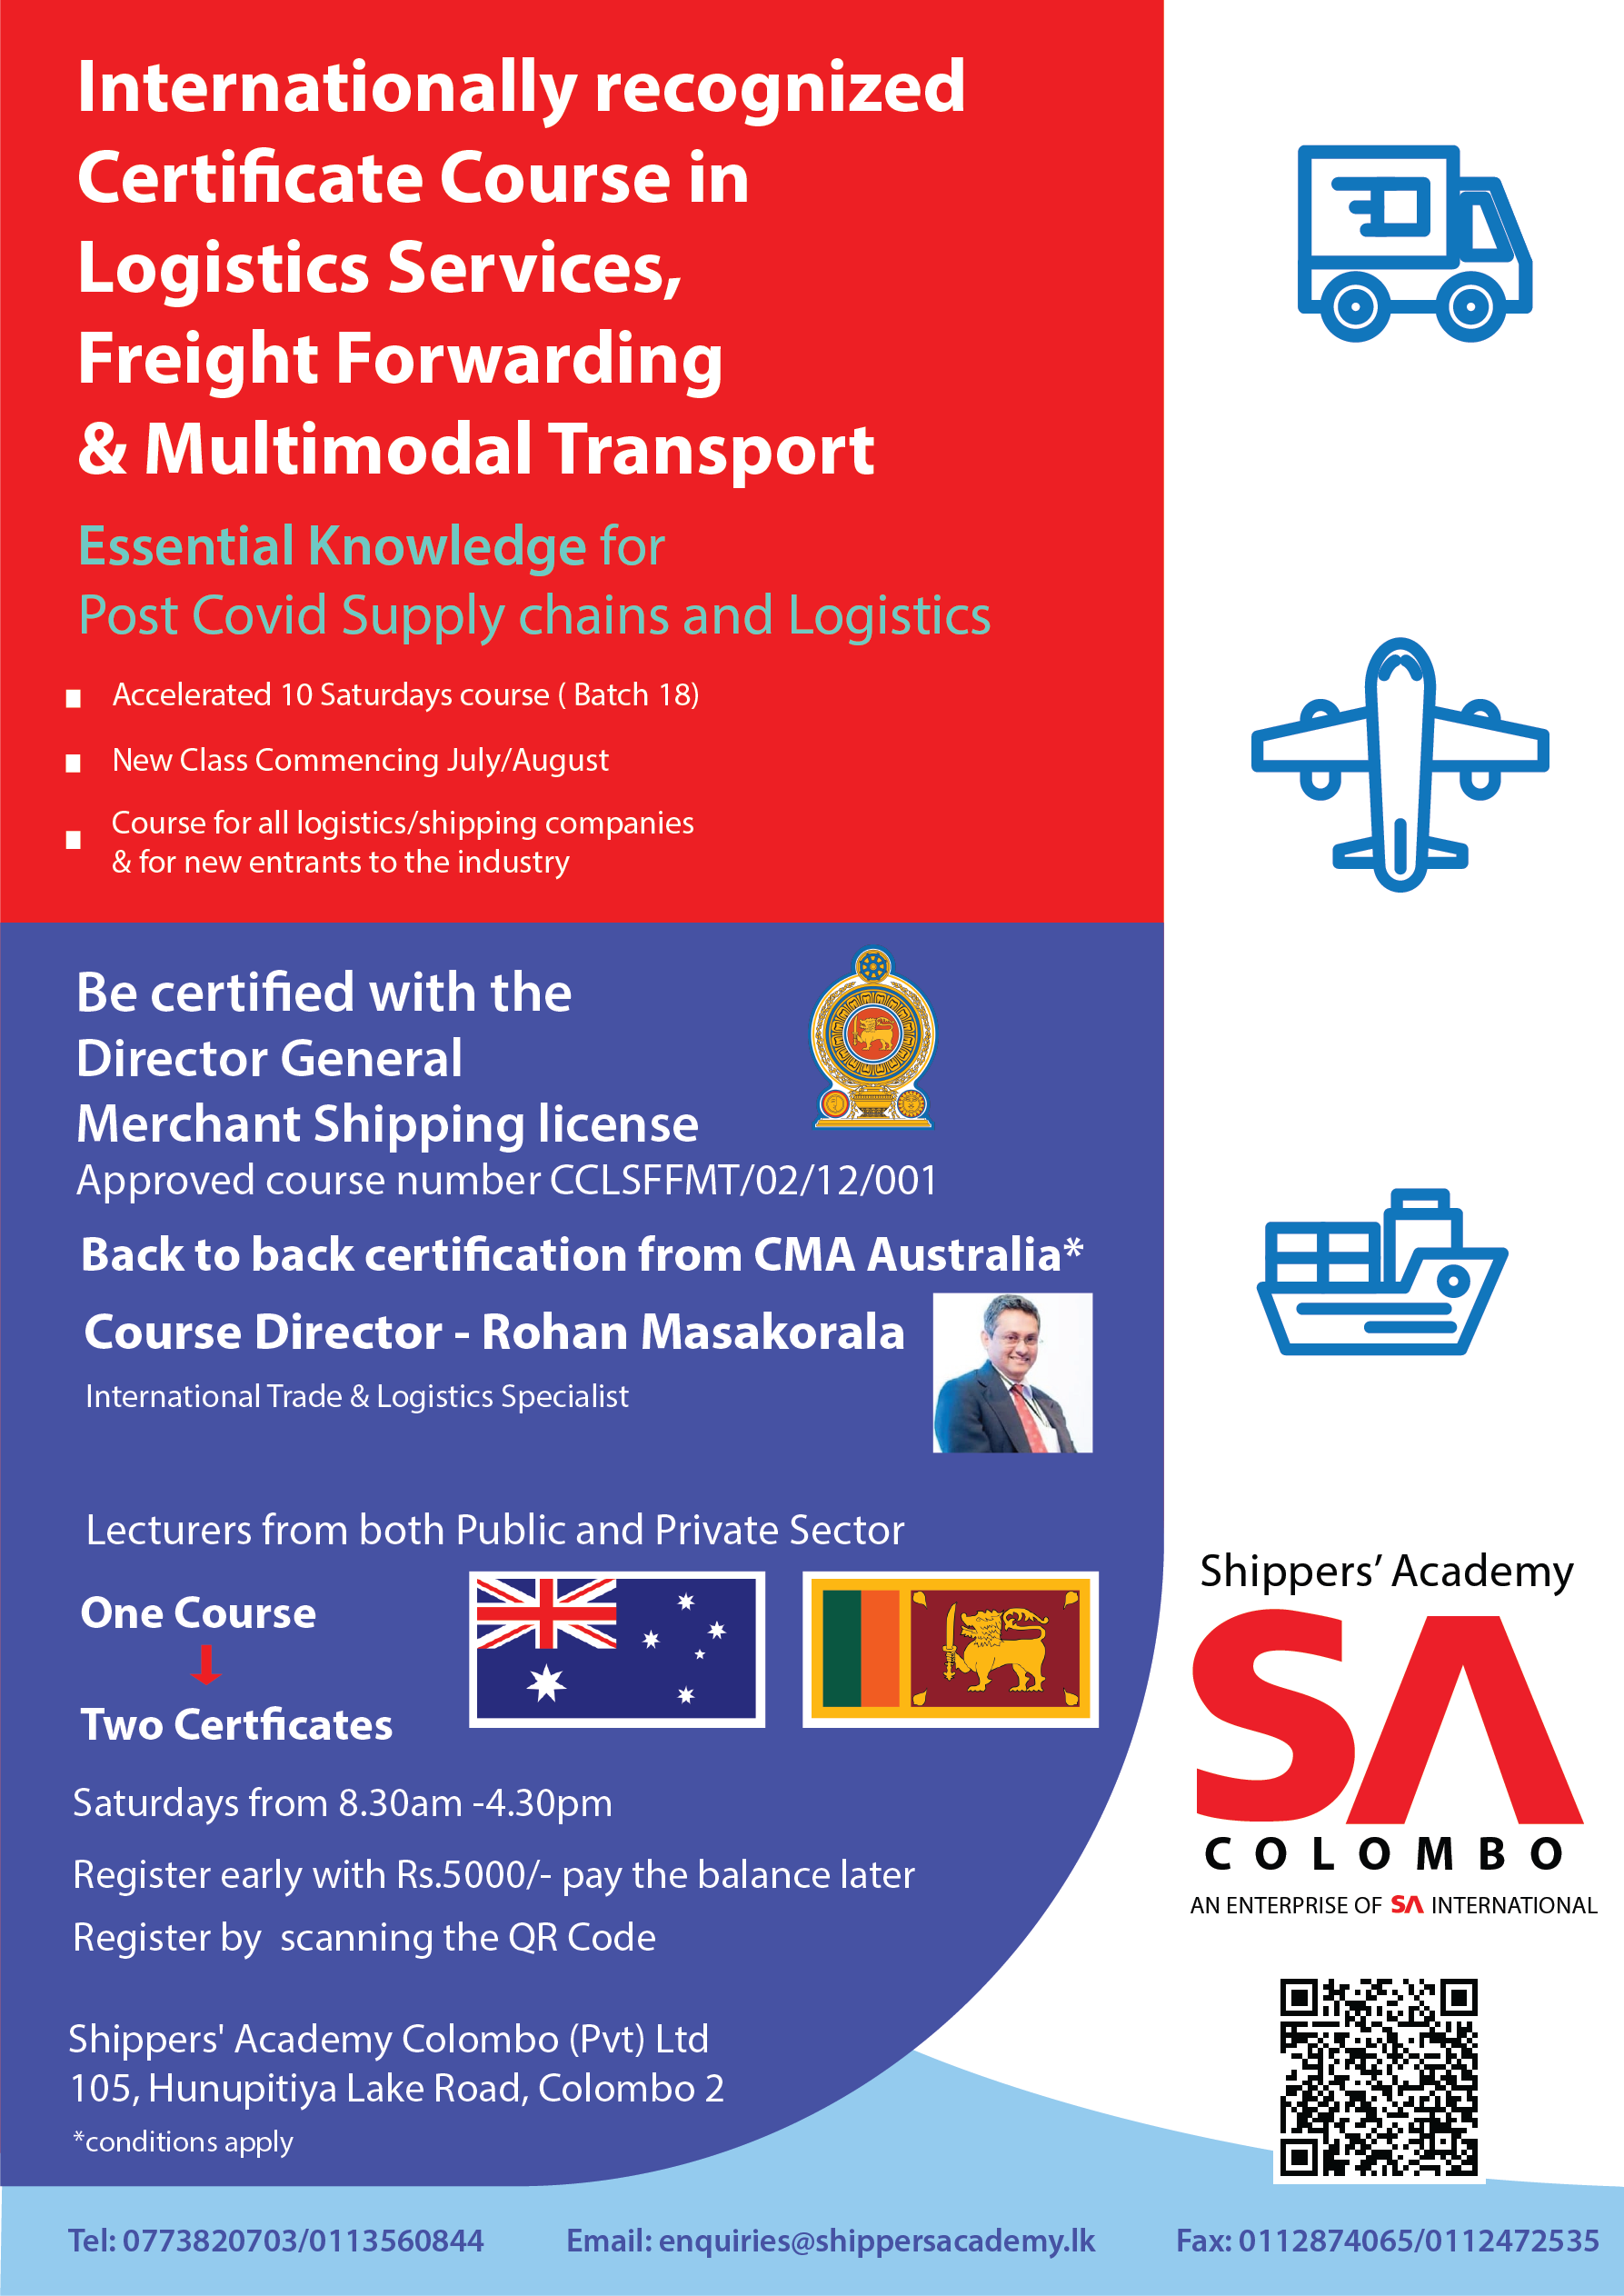 Internationally recognized Certicate Course in Logistics Services, Freight Forwarding & Multimodal Transport